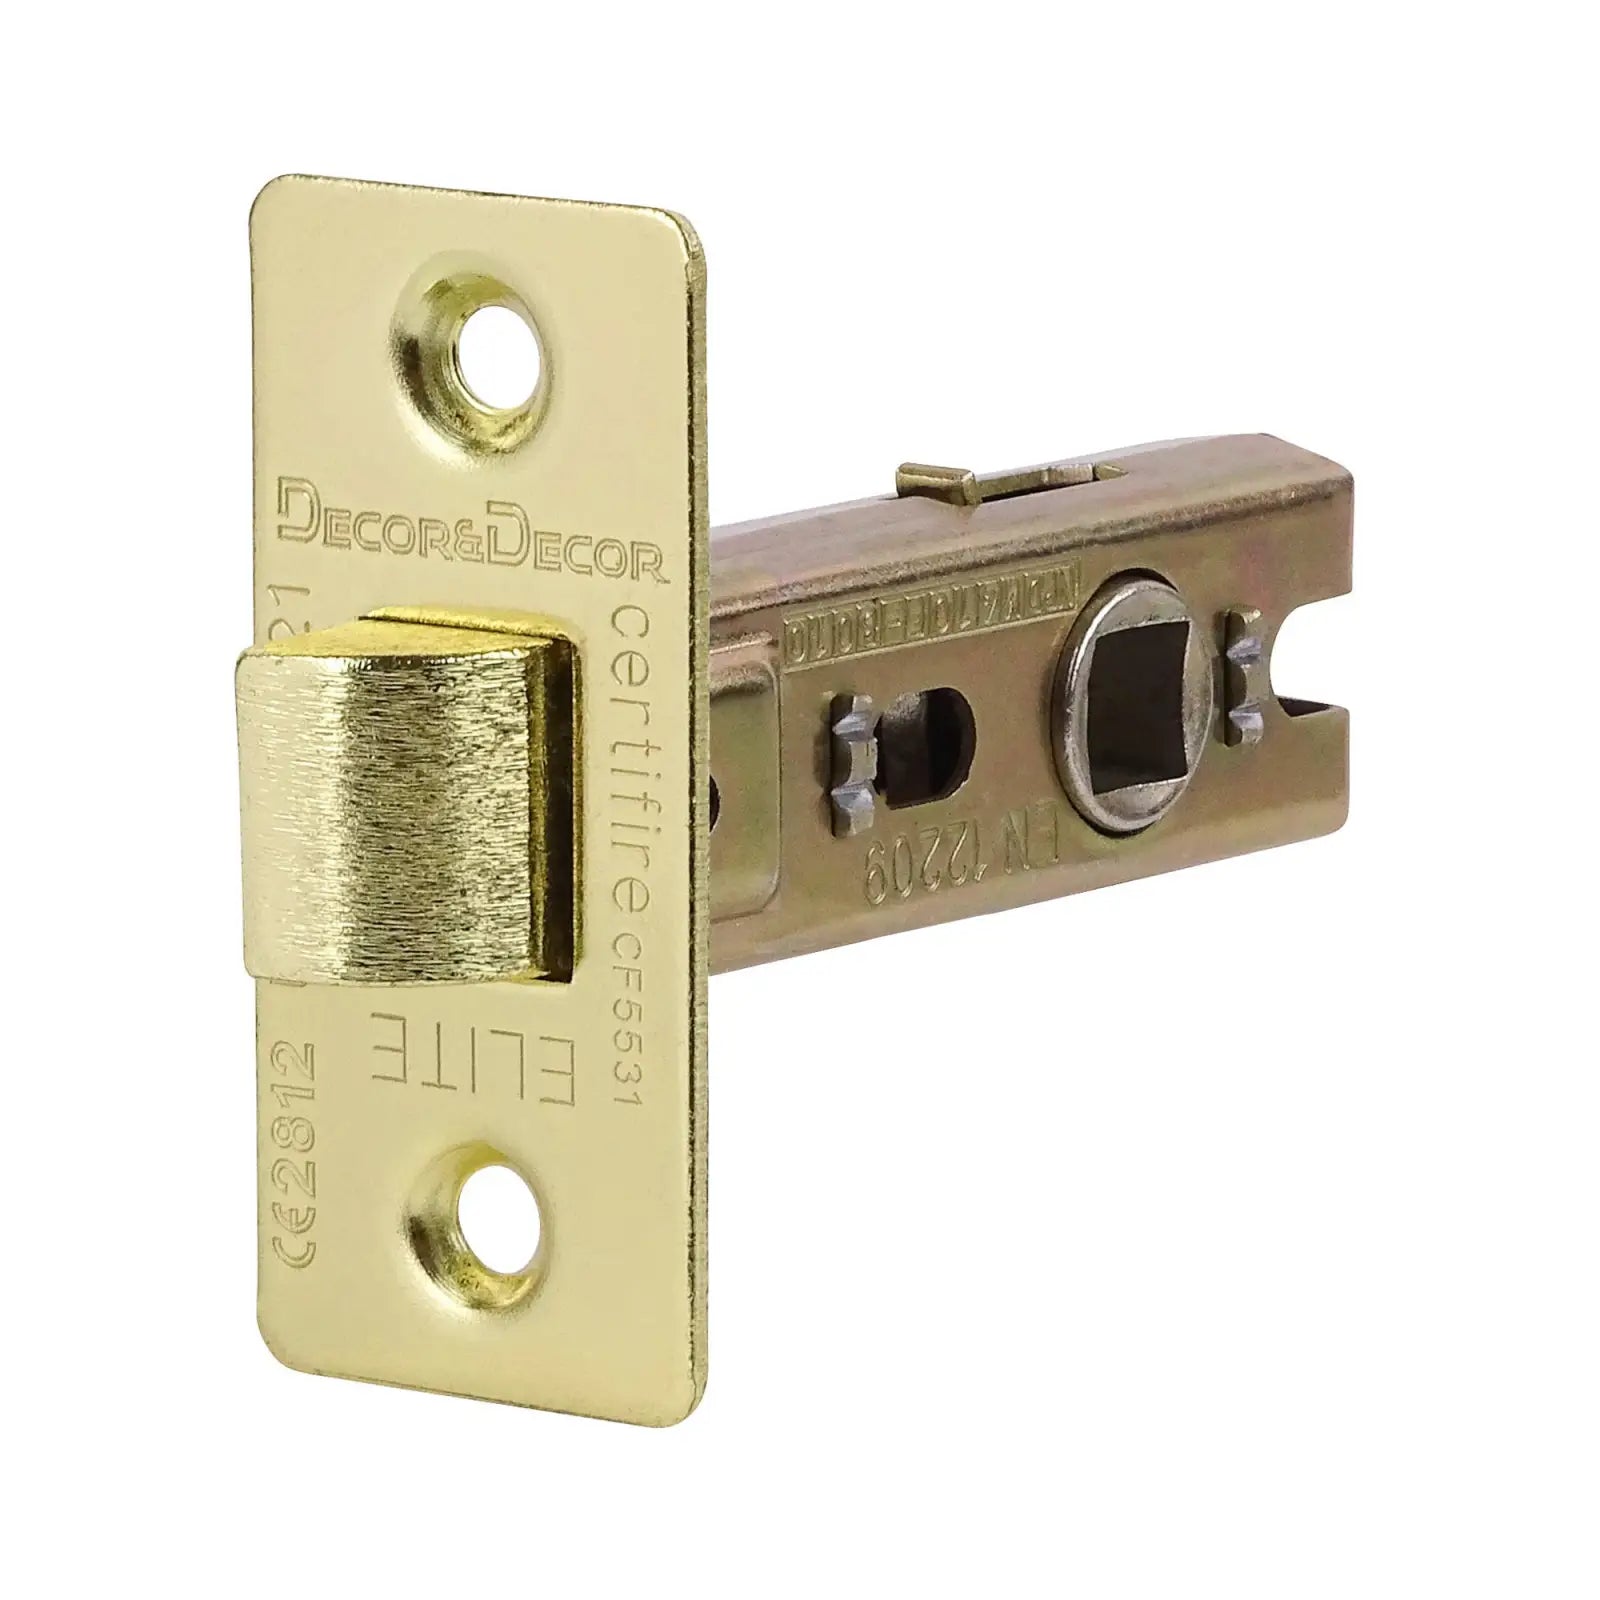 Fire Rated Tubular Mortice Latch - 76mm - Polished Brass